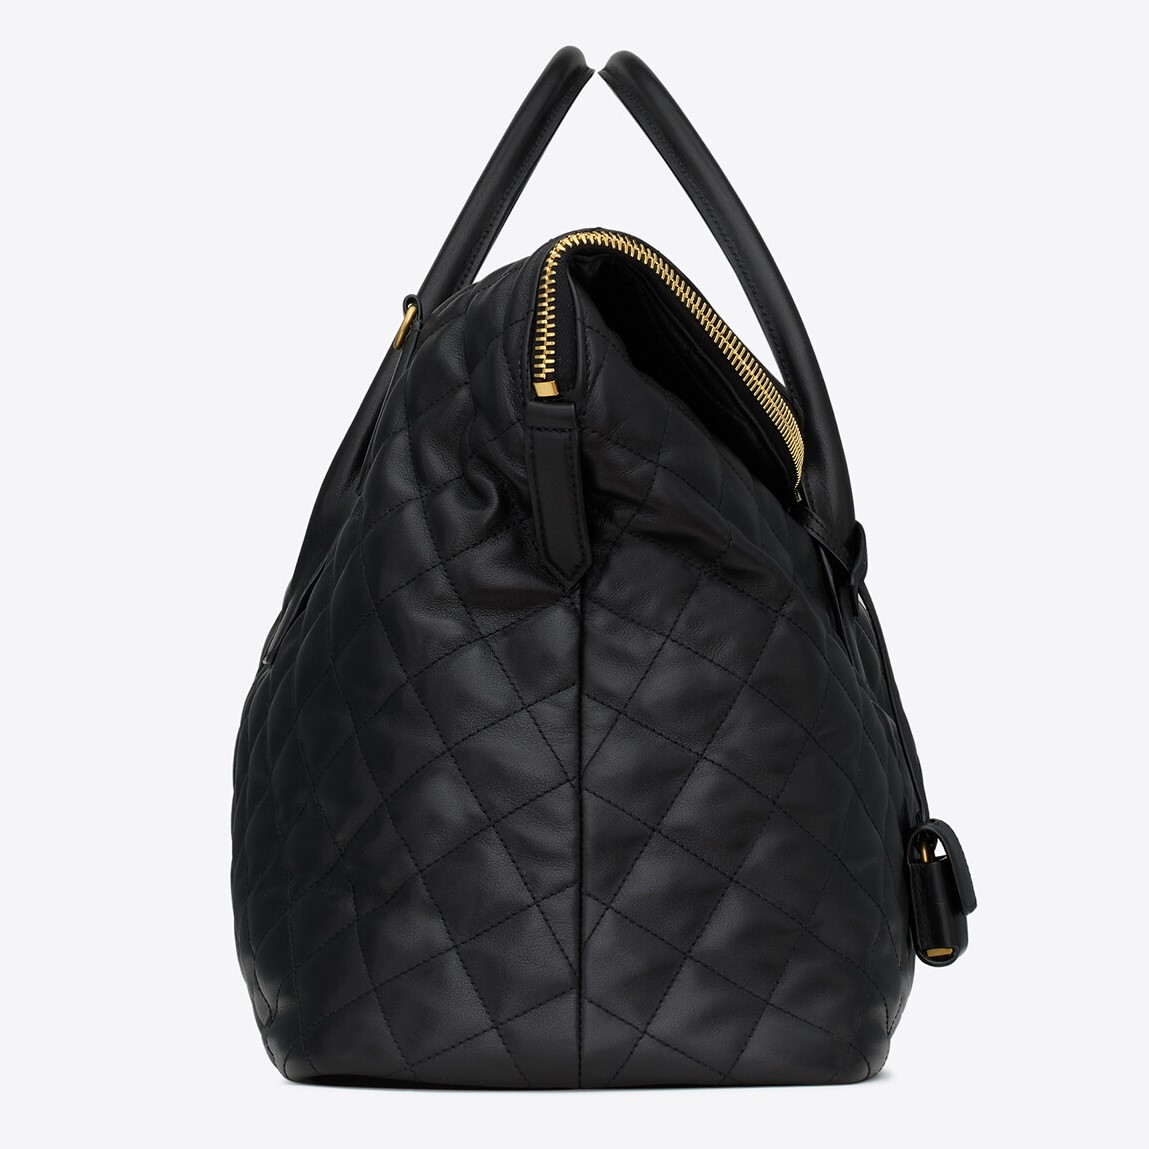 TÚI XÁCH DU LỊCH YSL ES GIANT TRAVEL BAG IN QUILTED LEATHER 3